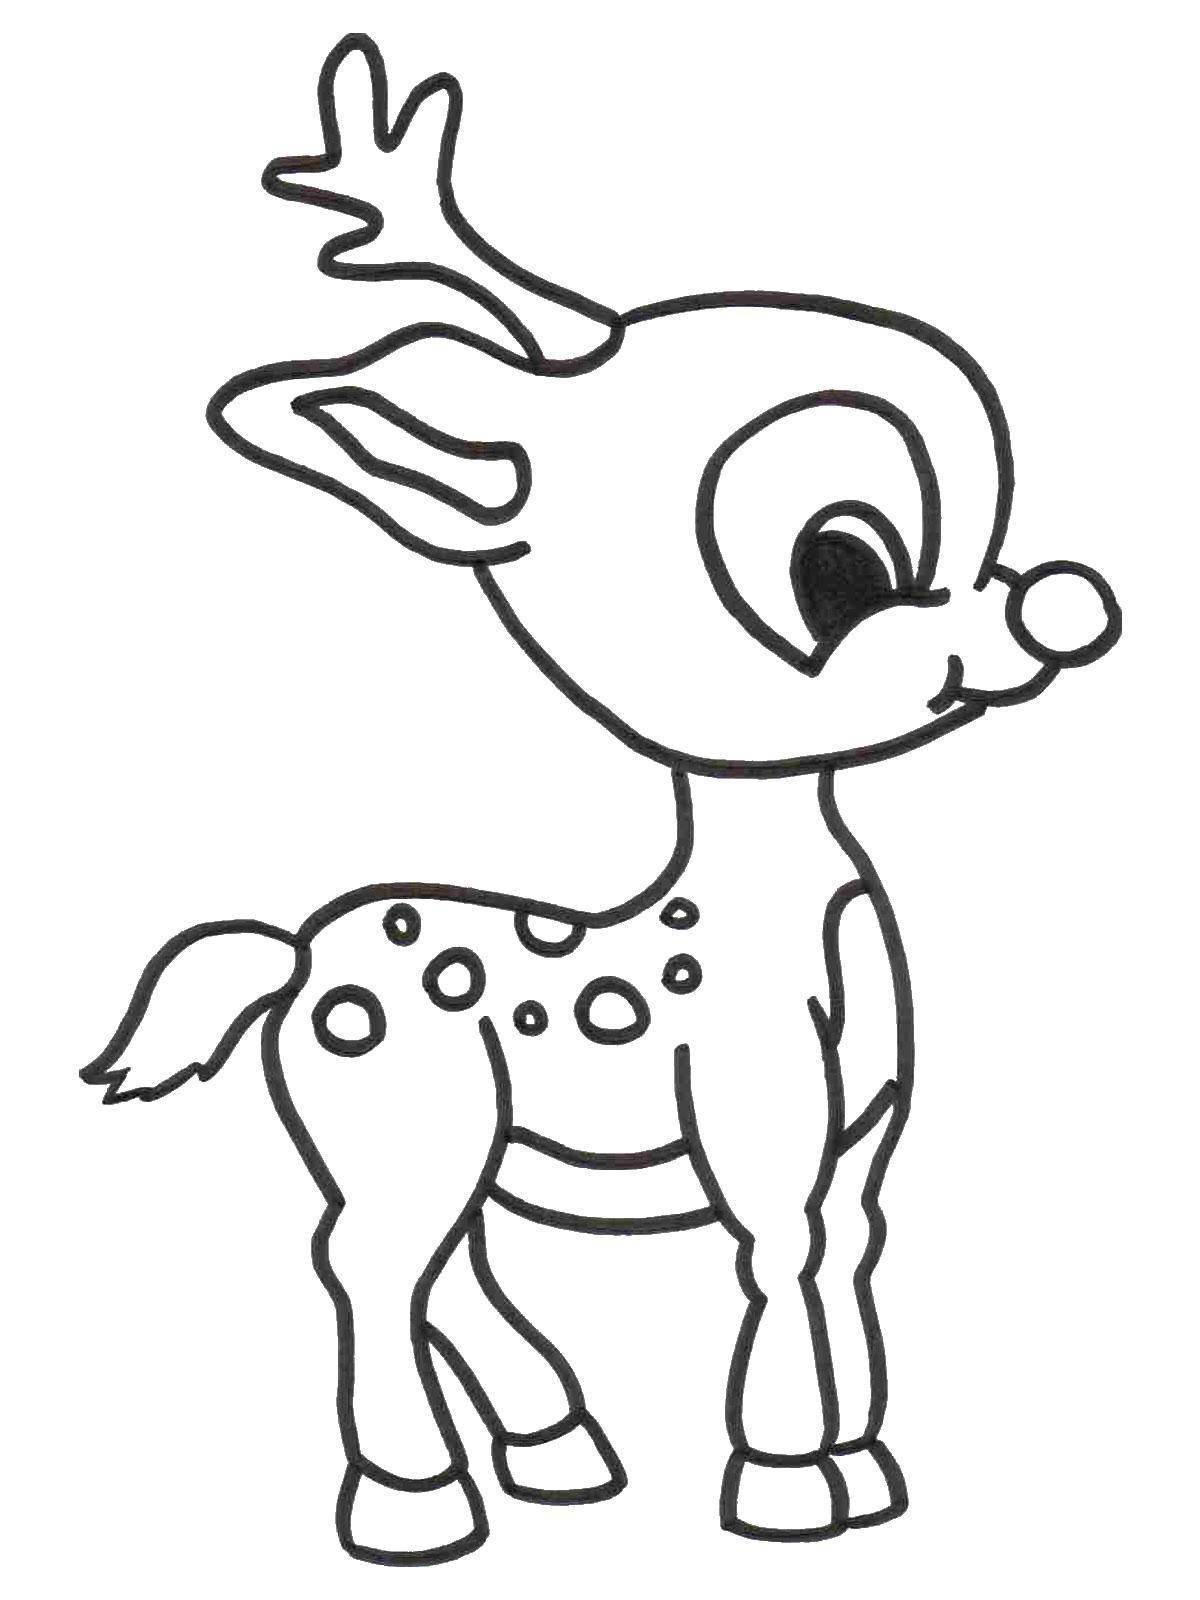 Gorgeous deer coloring book for kids